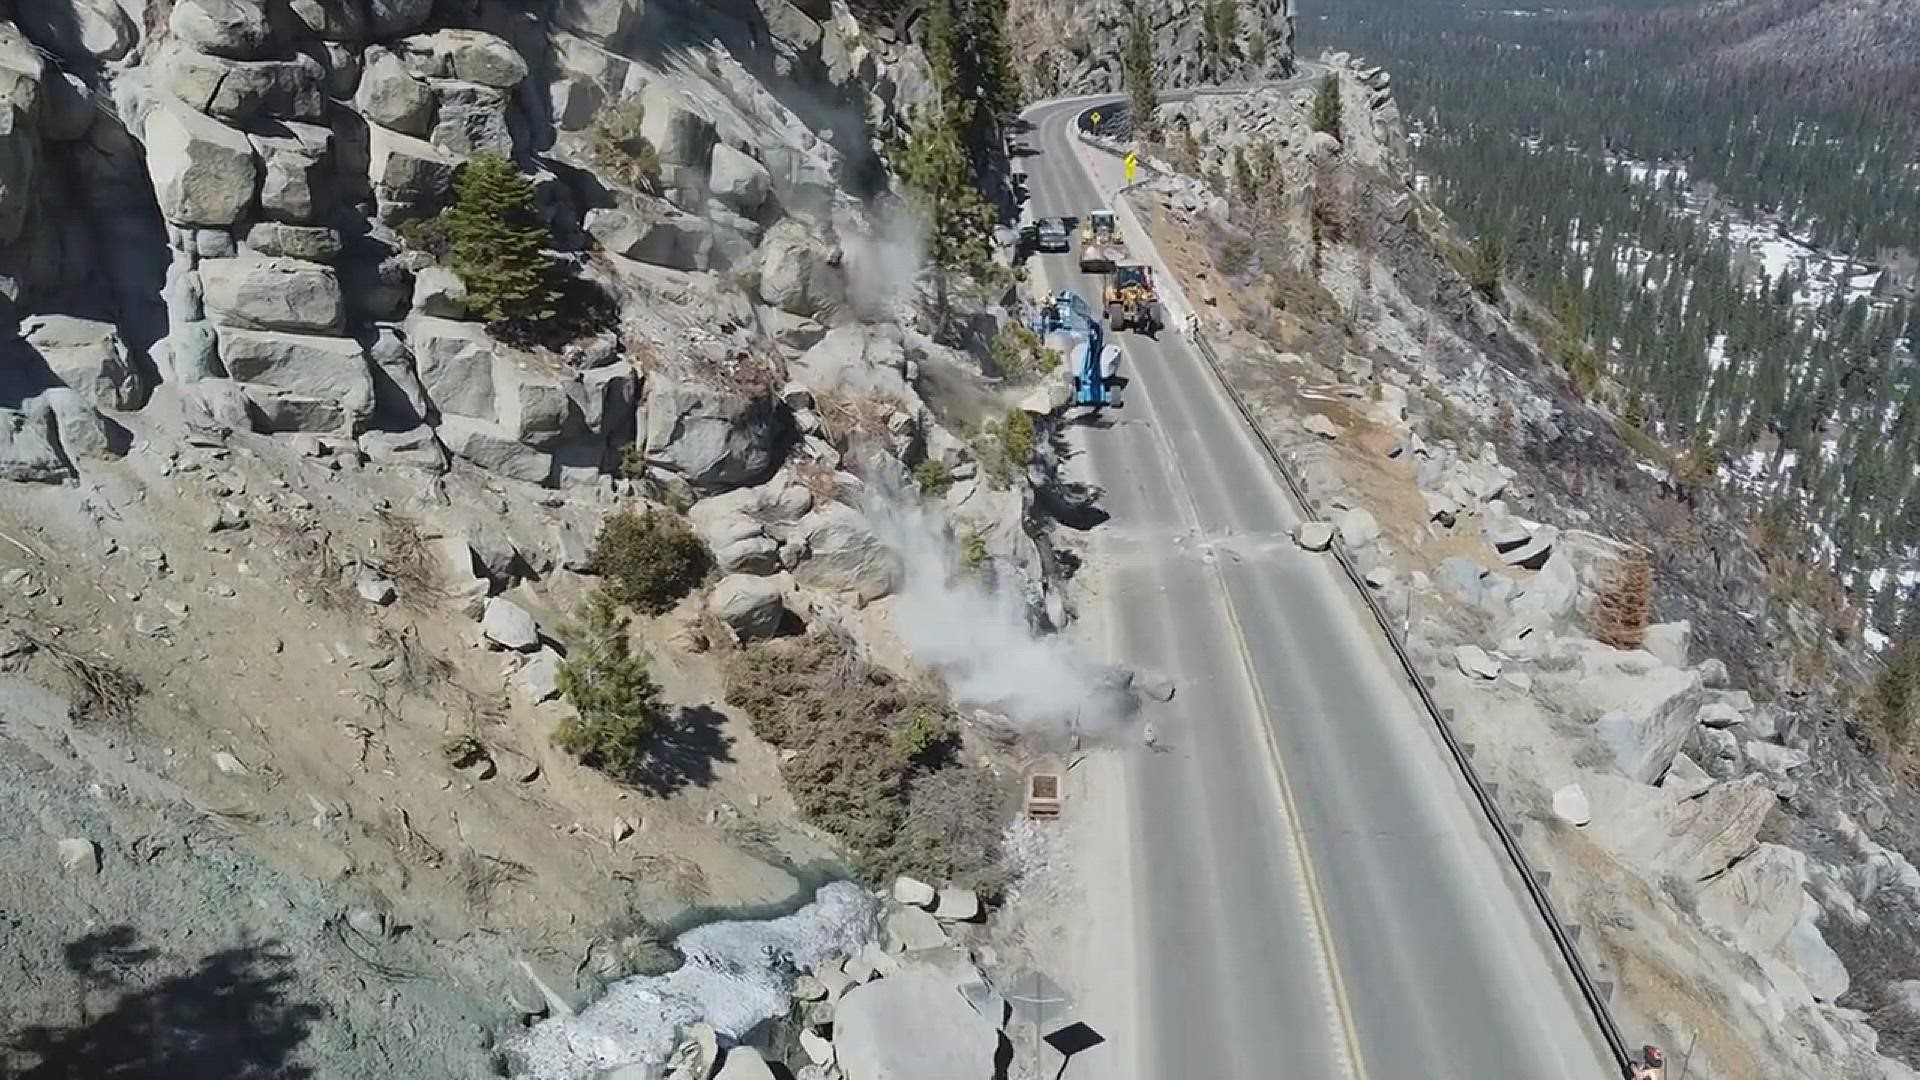 Crews are reportedly using hand tools and airbag devices to break down the large boulders―sending them tumbling down the slope. Video by Kelly Wisner at Caltrans.